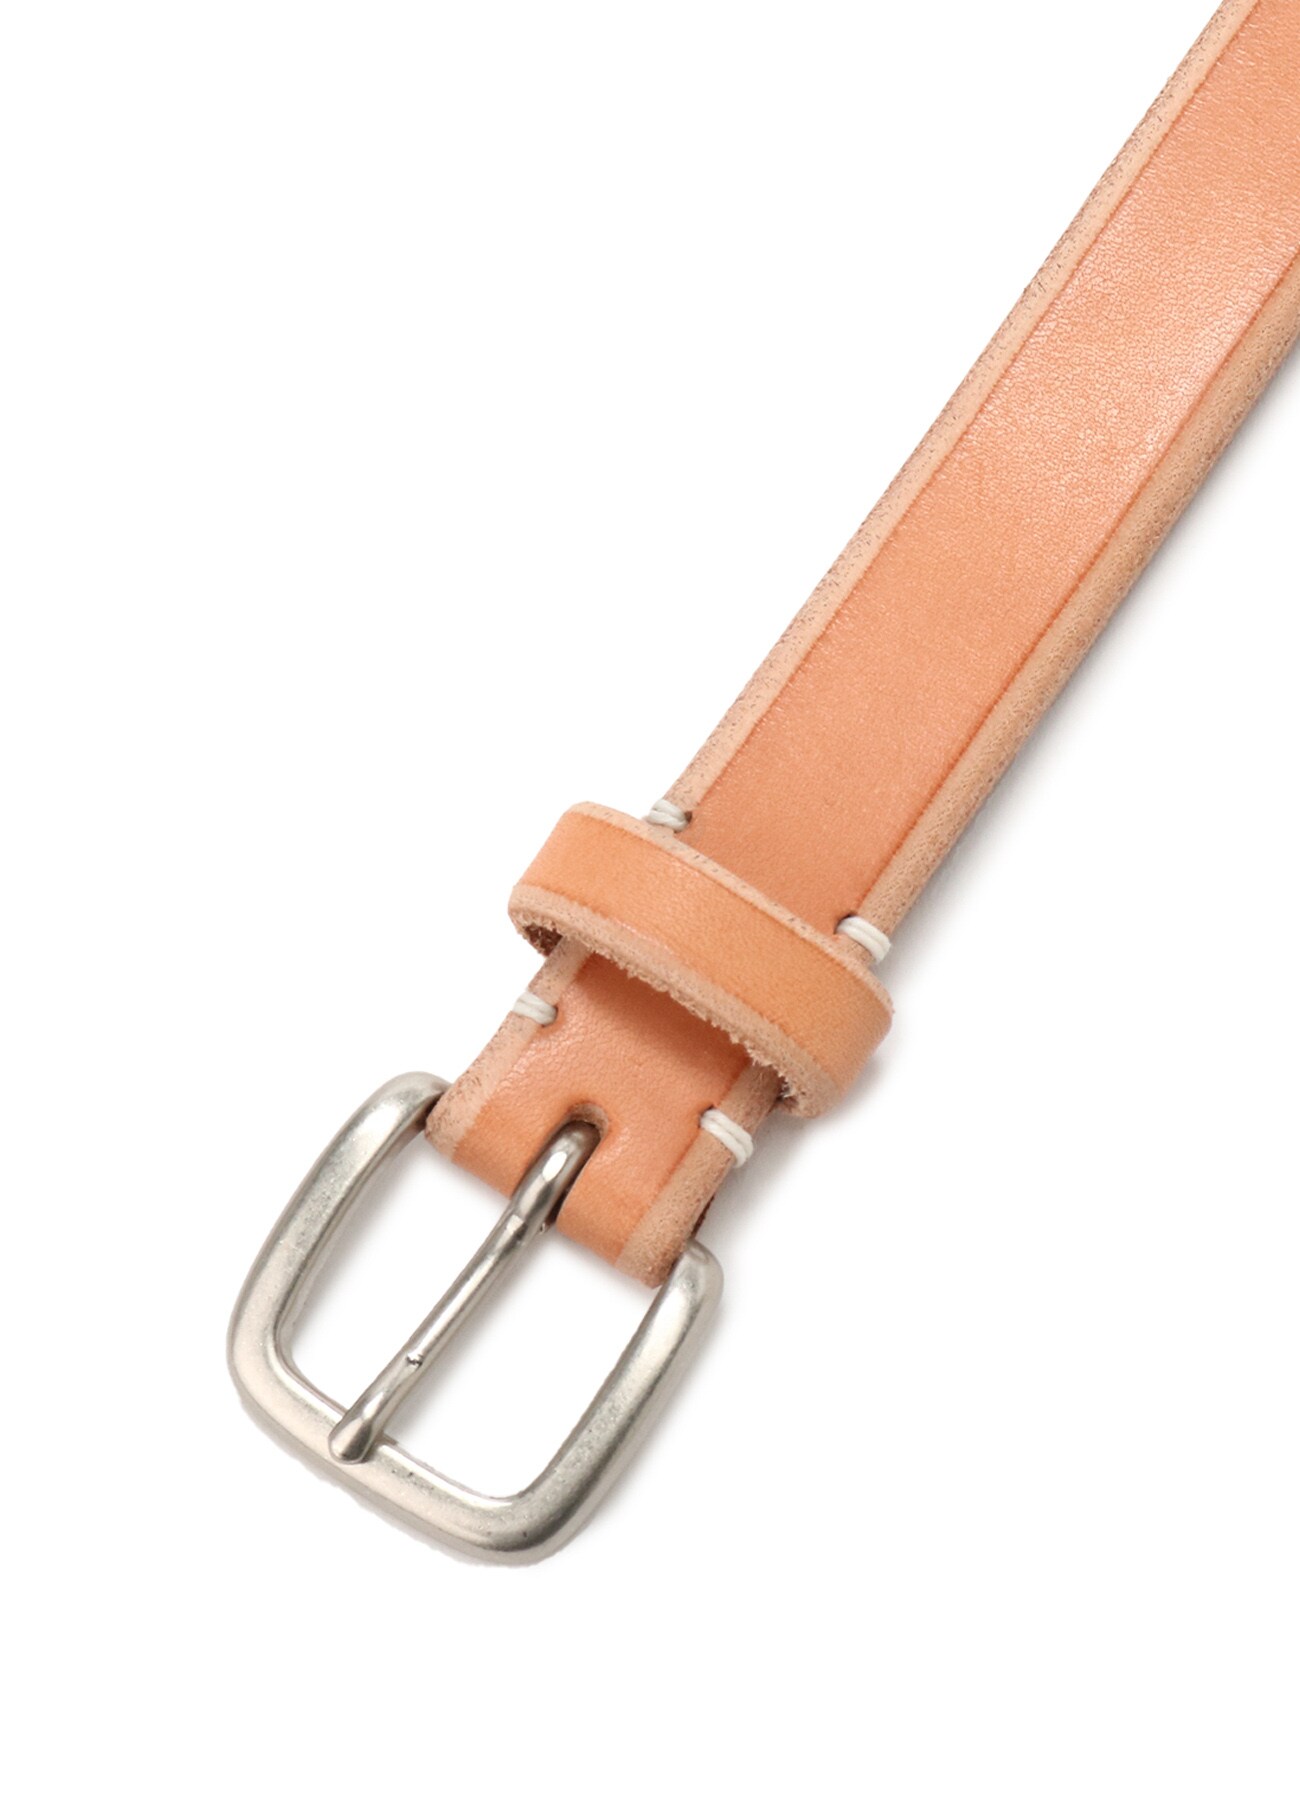 THICK LEATHER 25mm BELT